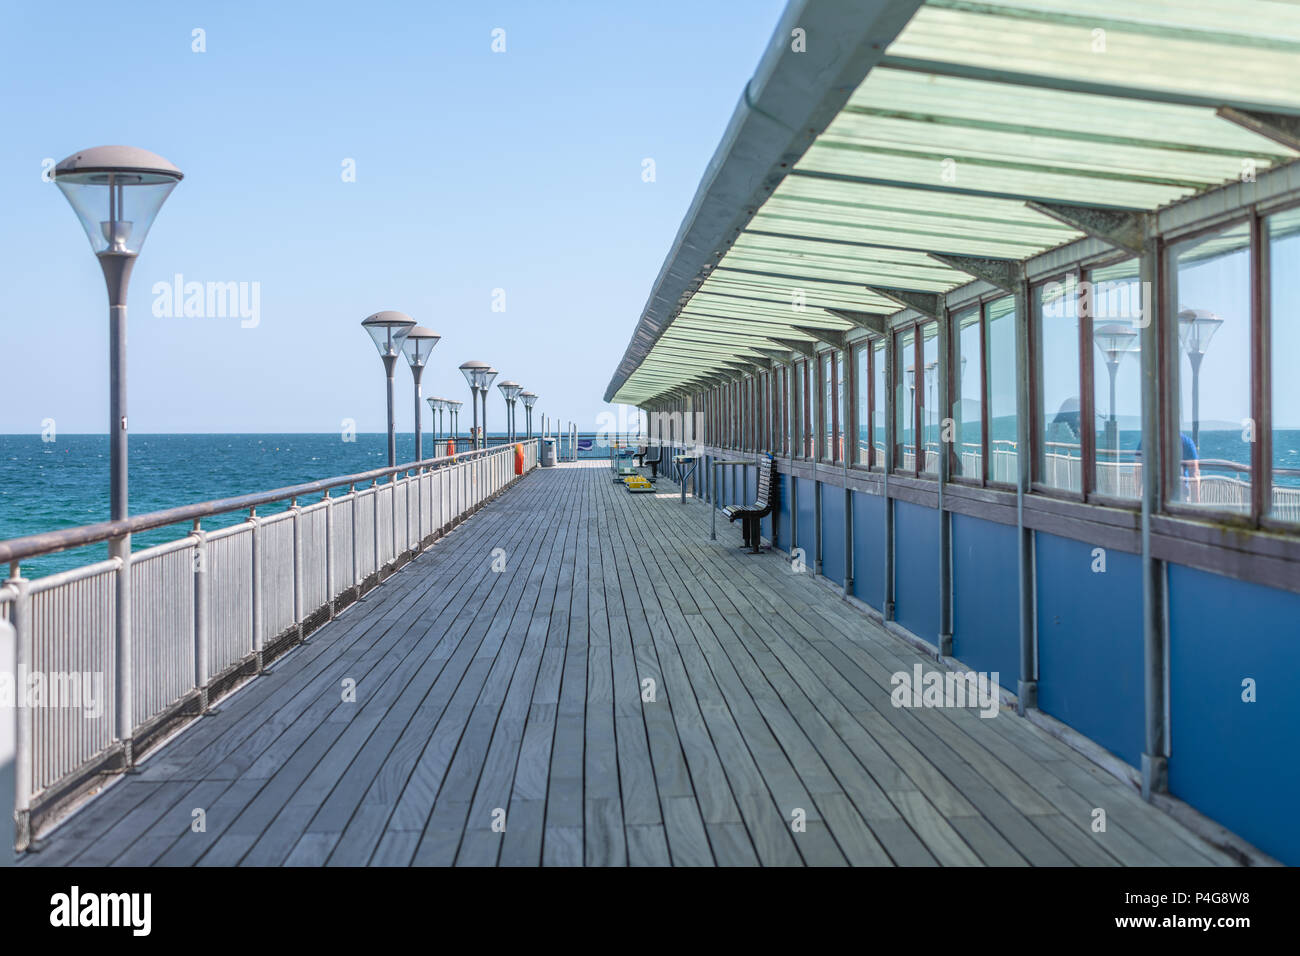 Bournemouth, UK. 22nd June 2018. A view down Boscombe pier in Bournemouth. Thomas Faull/Alamy Live News Stock Photo